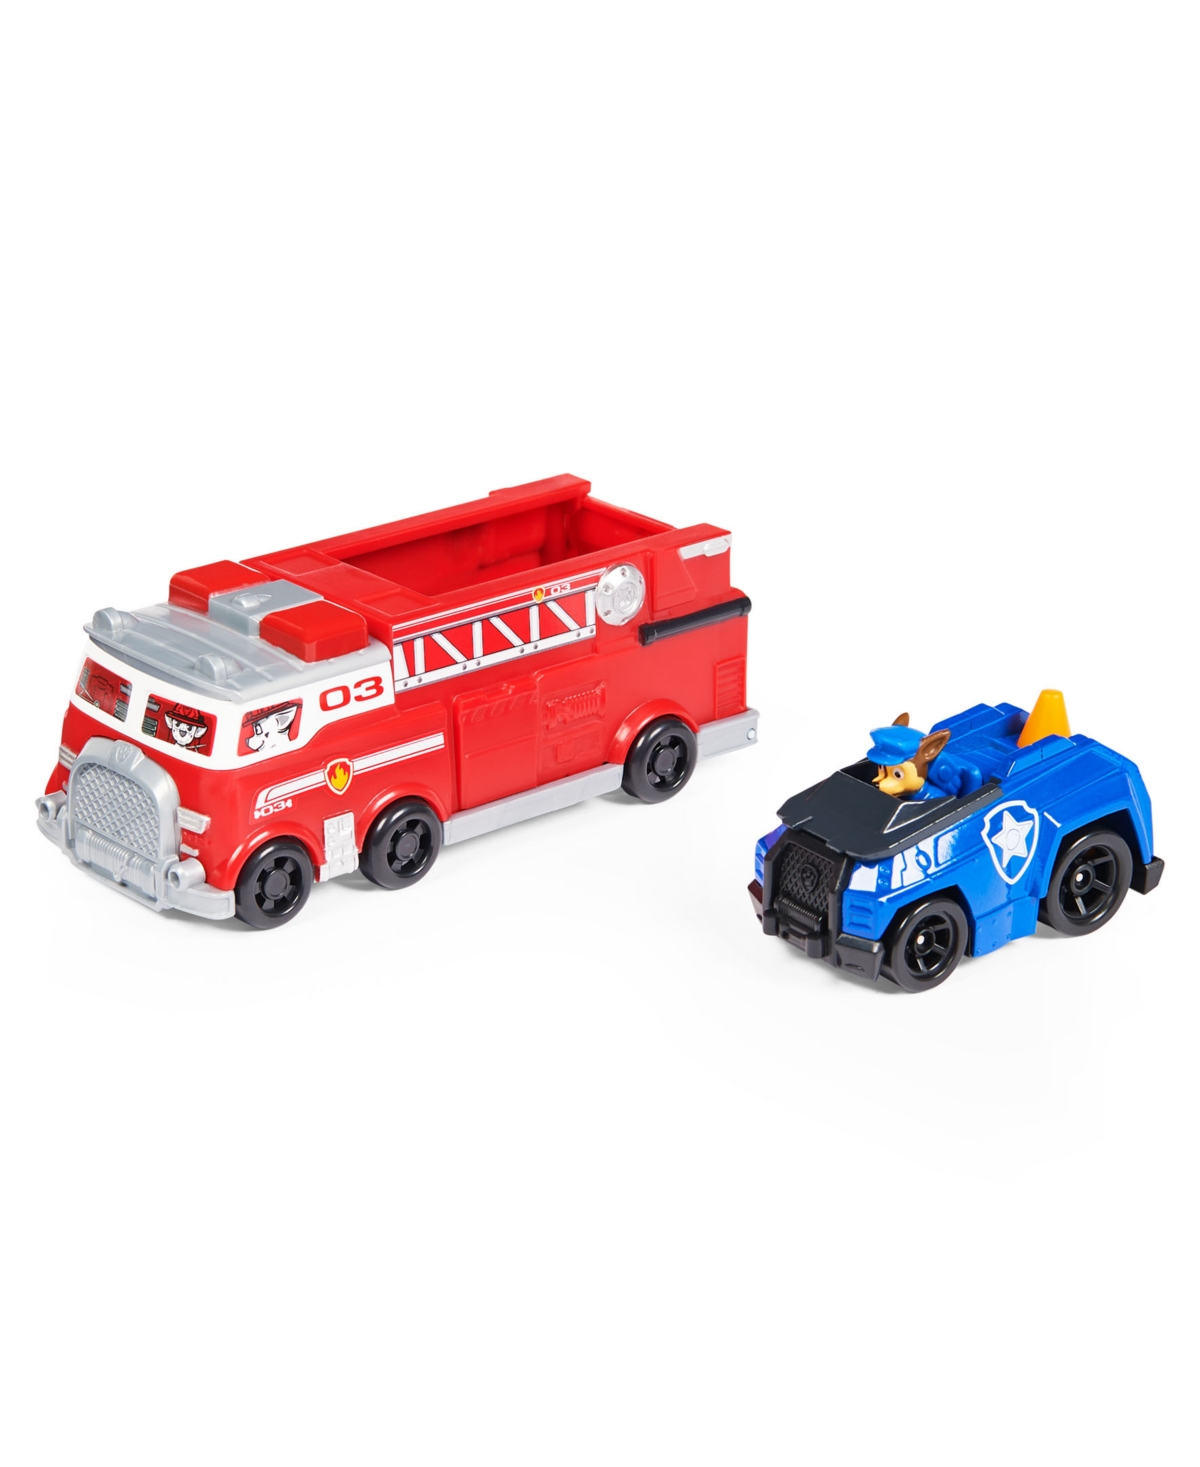 Paw Patrol Kids' True Metal Firetruck Die-cast Team Vehicle With 1:55 Scale Chase In Multi-color